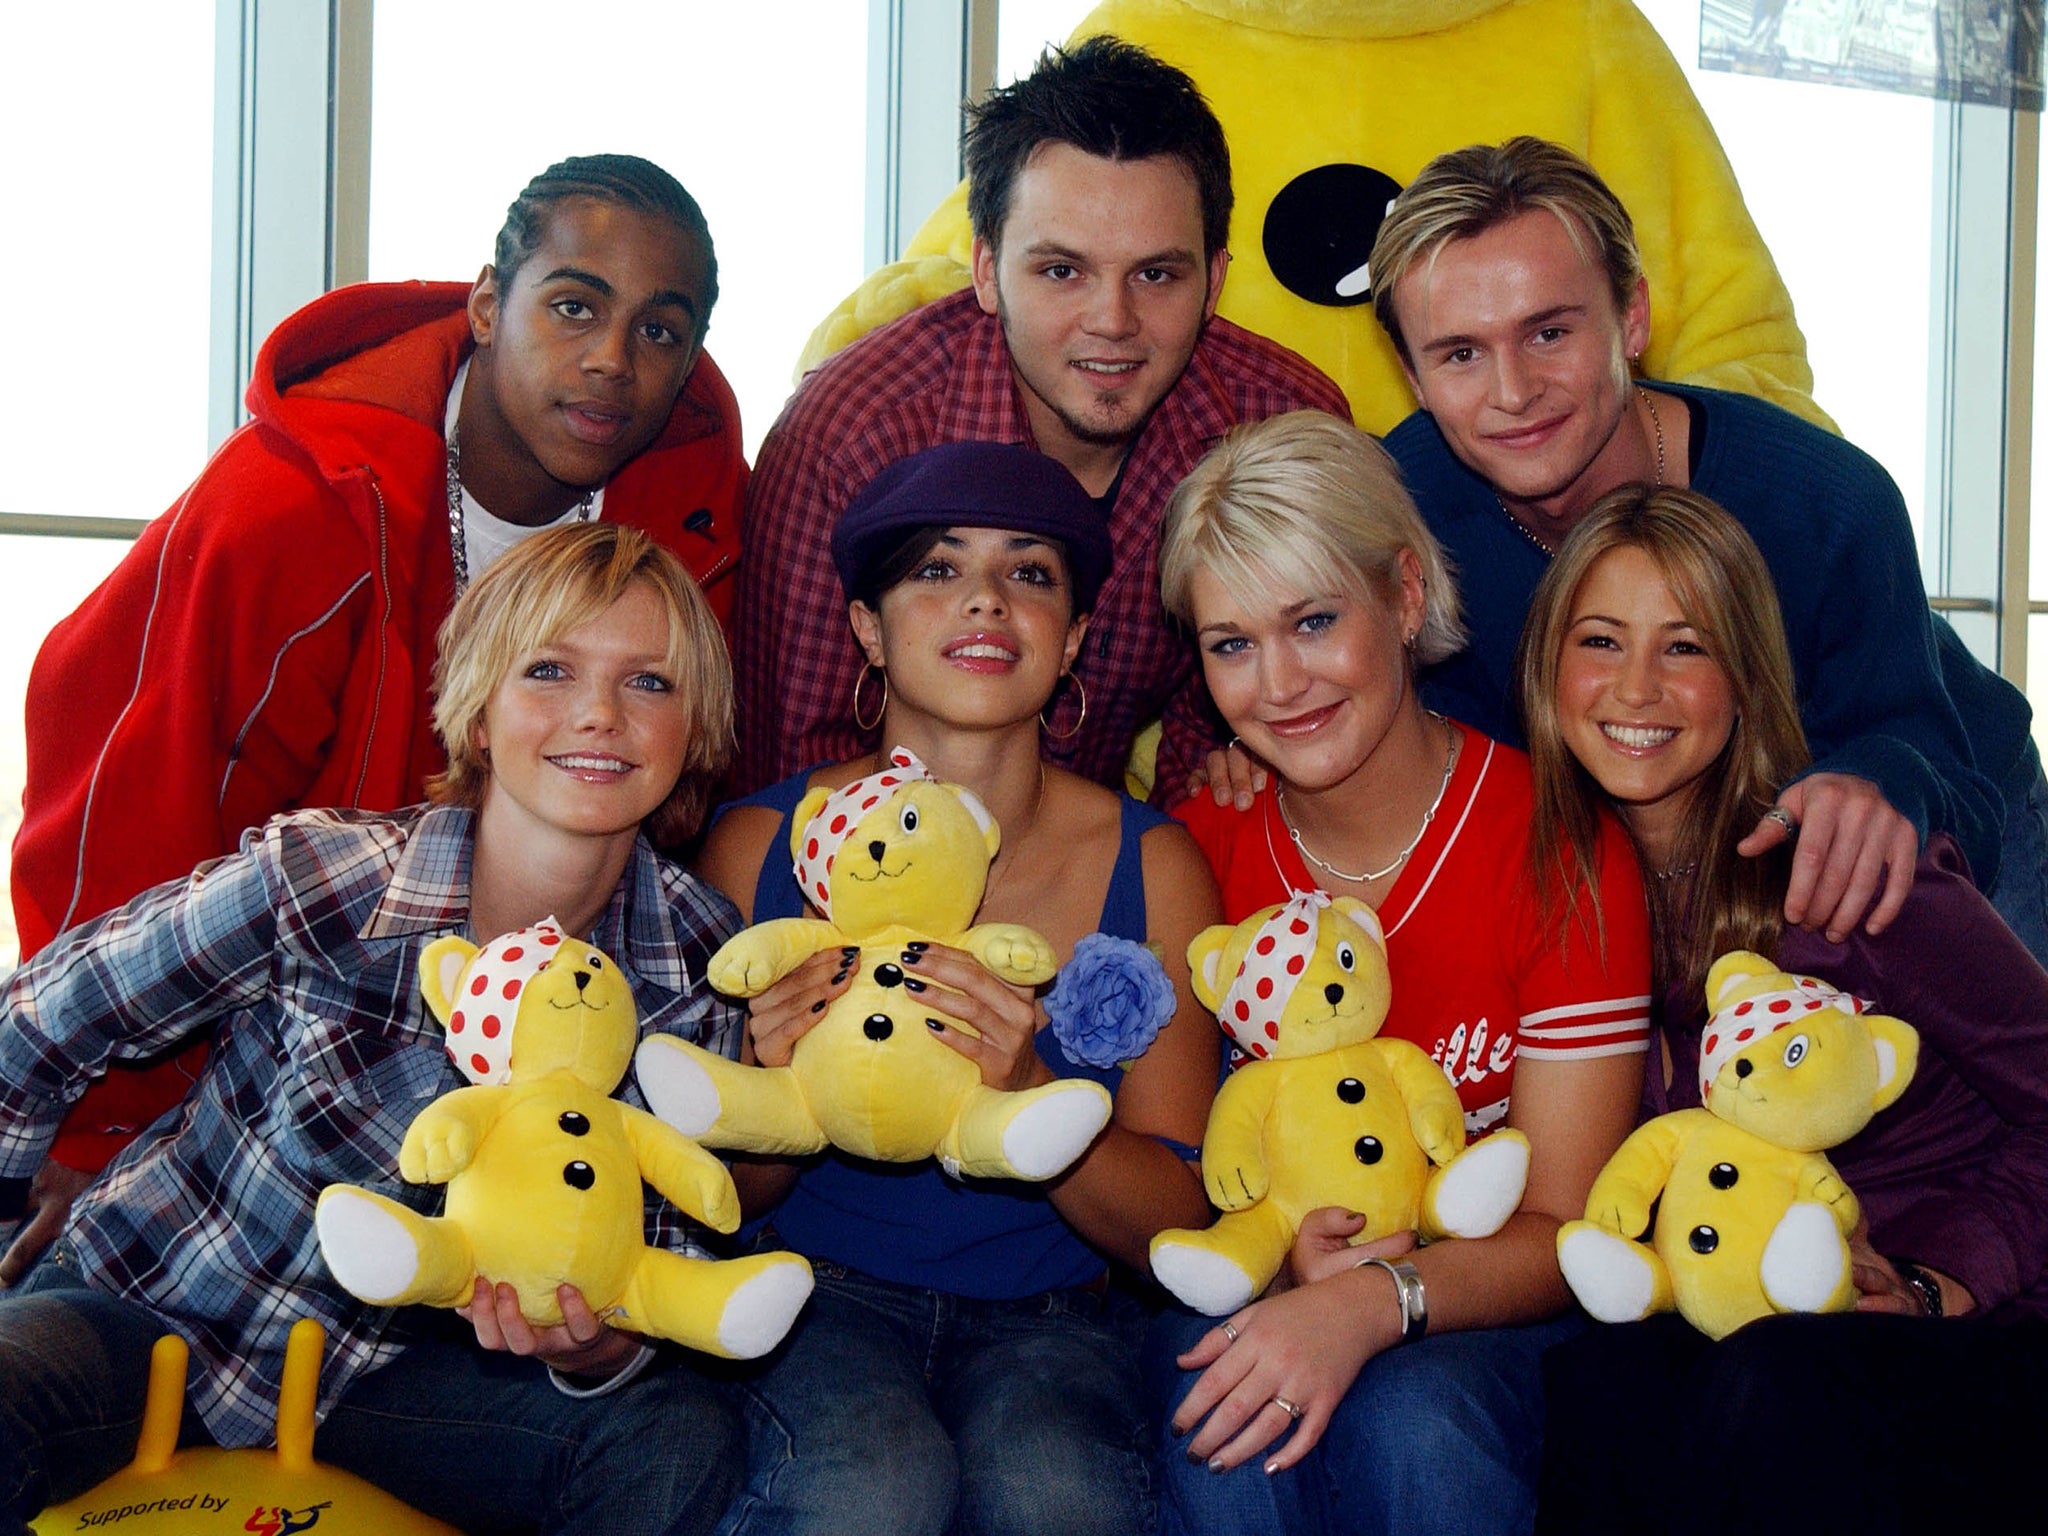 S Club 7 back in 2001 when they also supported 'Children in Need'